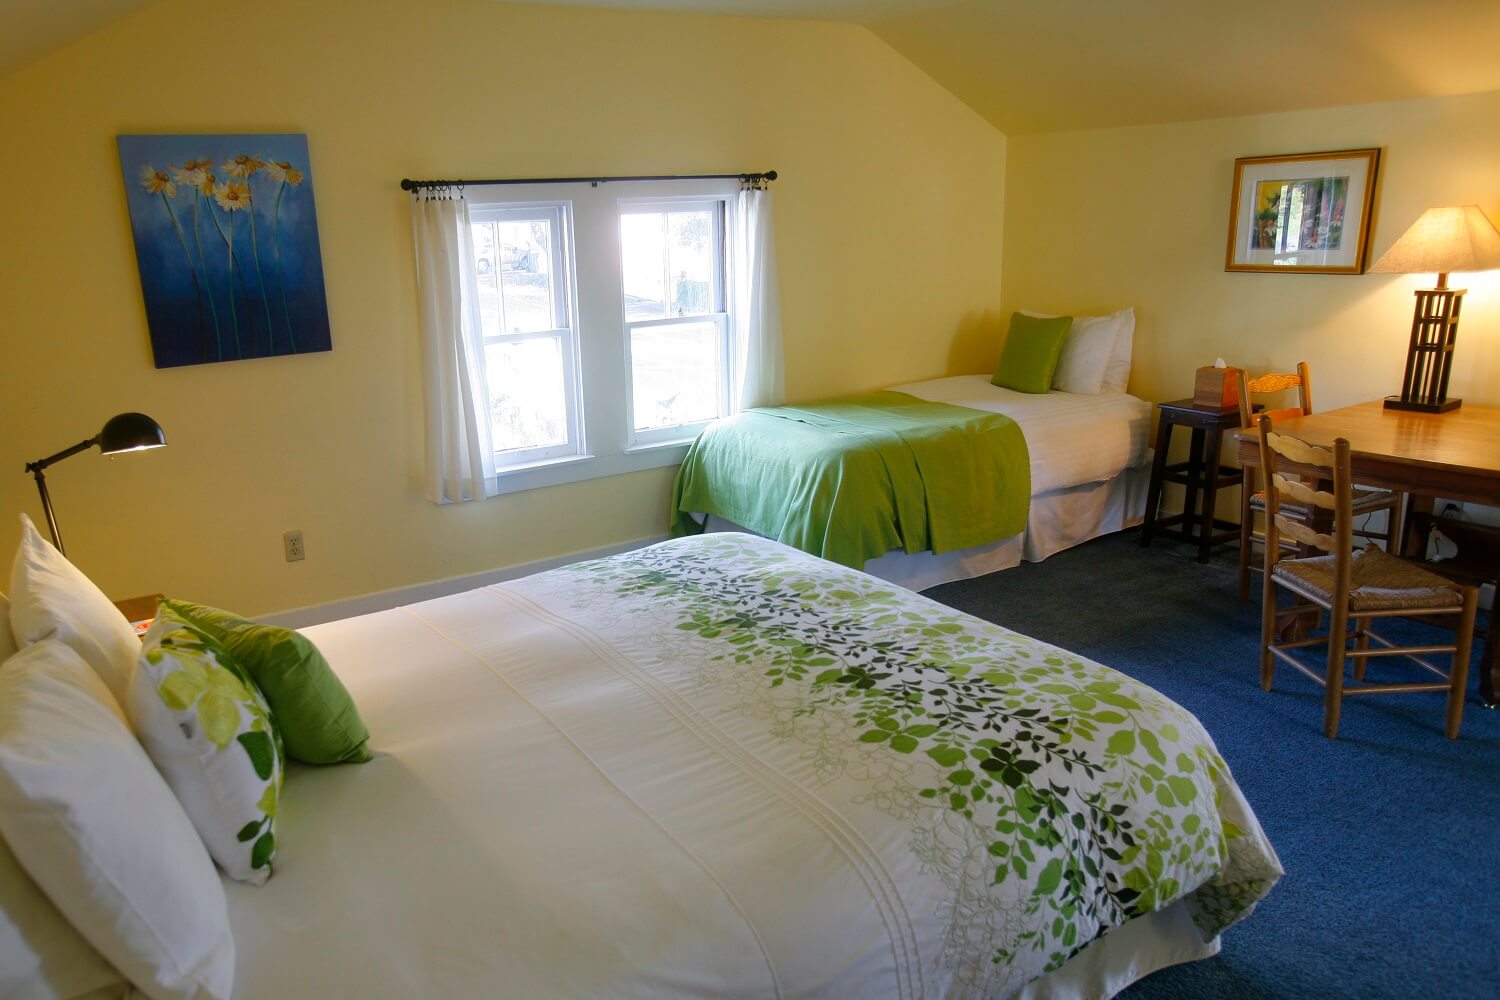 Aloft room view of queen and twin beds with table, chairs and nightstands